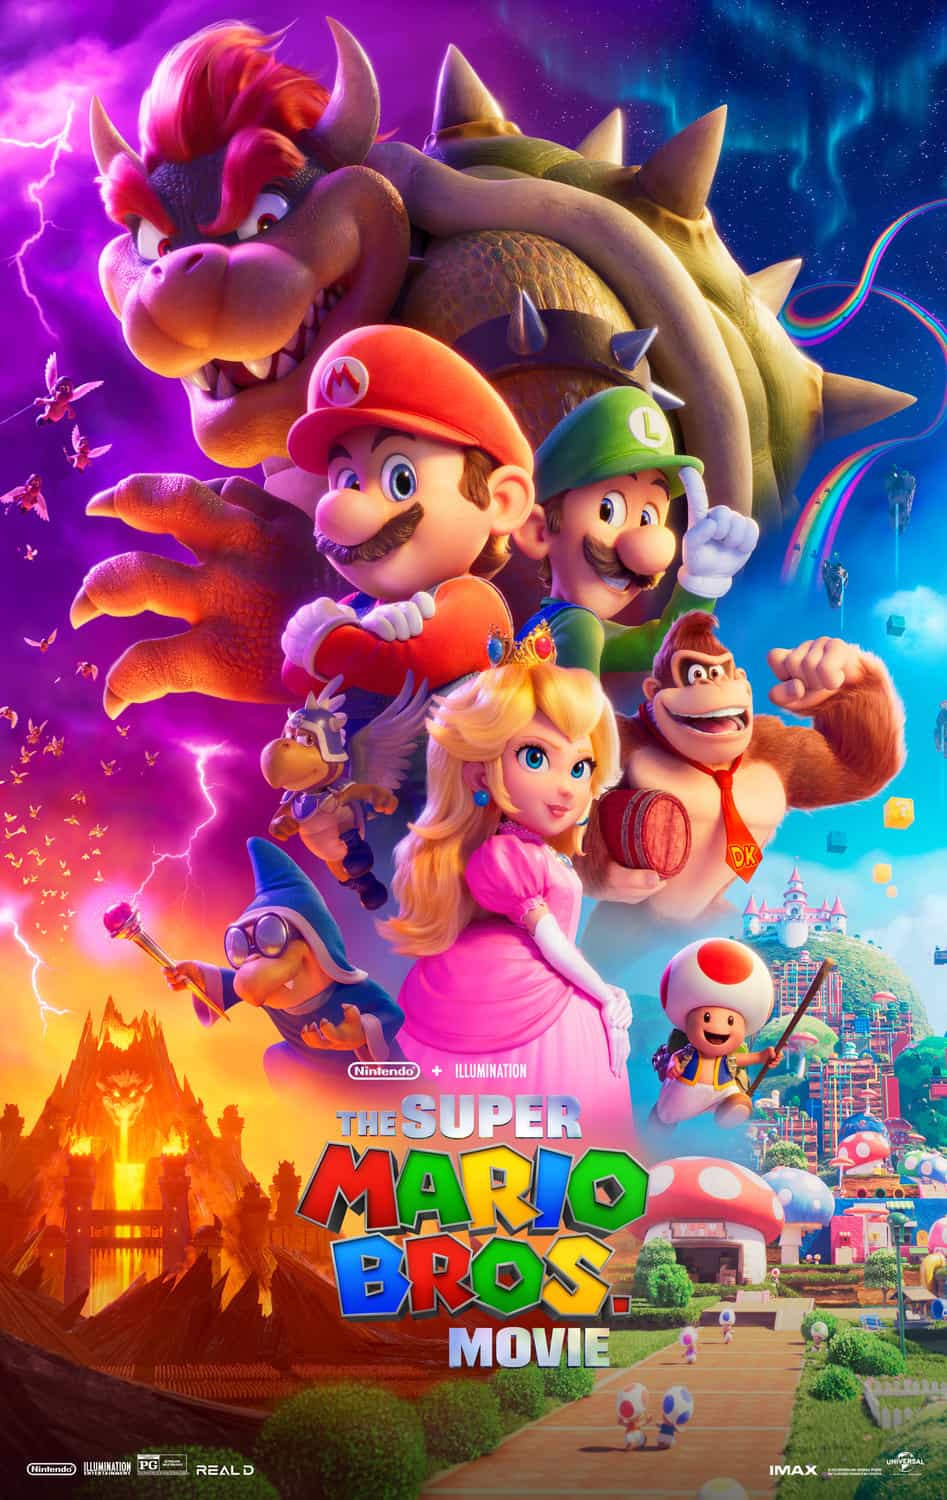 Last trailer released for The Super Mario Bros. Movie which stars Chris Pratt and Anya Taylor-Joy - movie UK release date 5th April 2023 #thesupermariobrosmovie